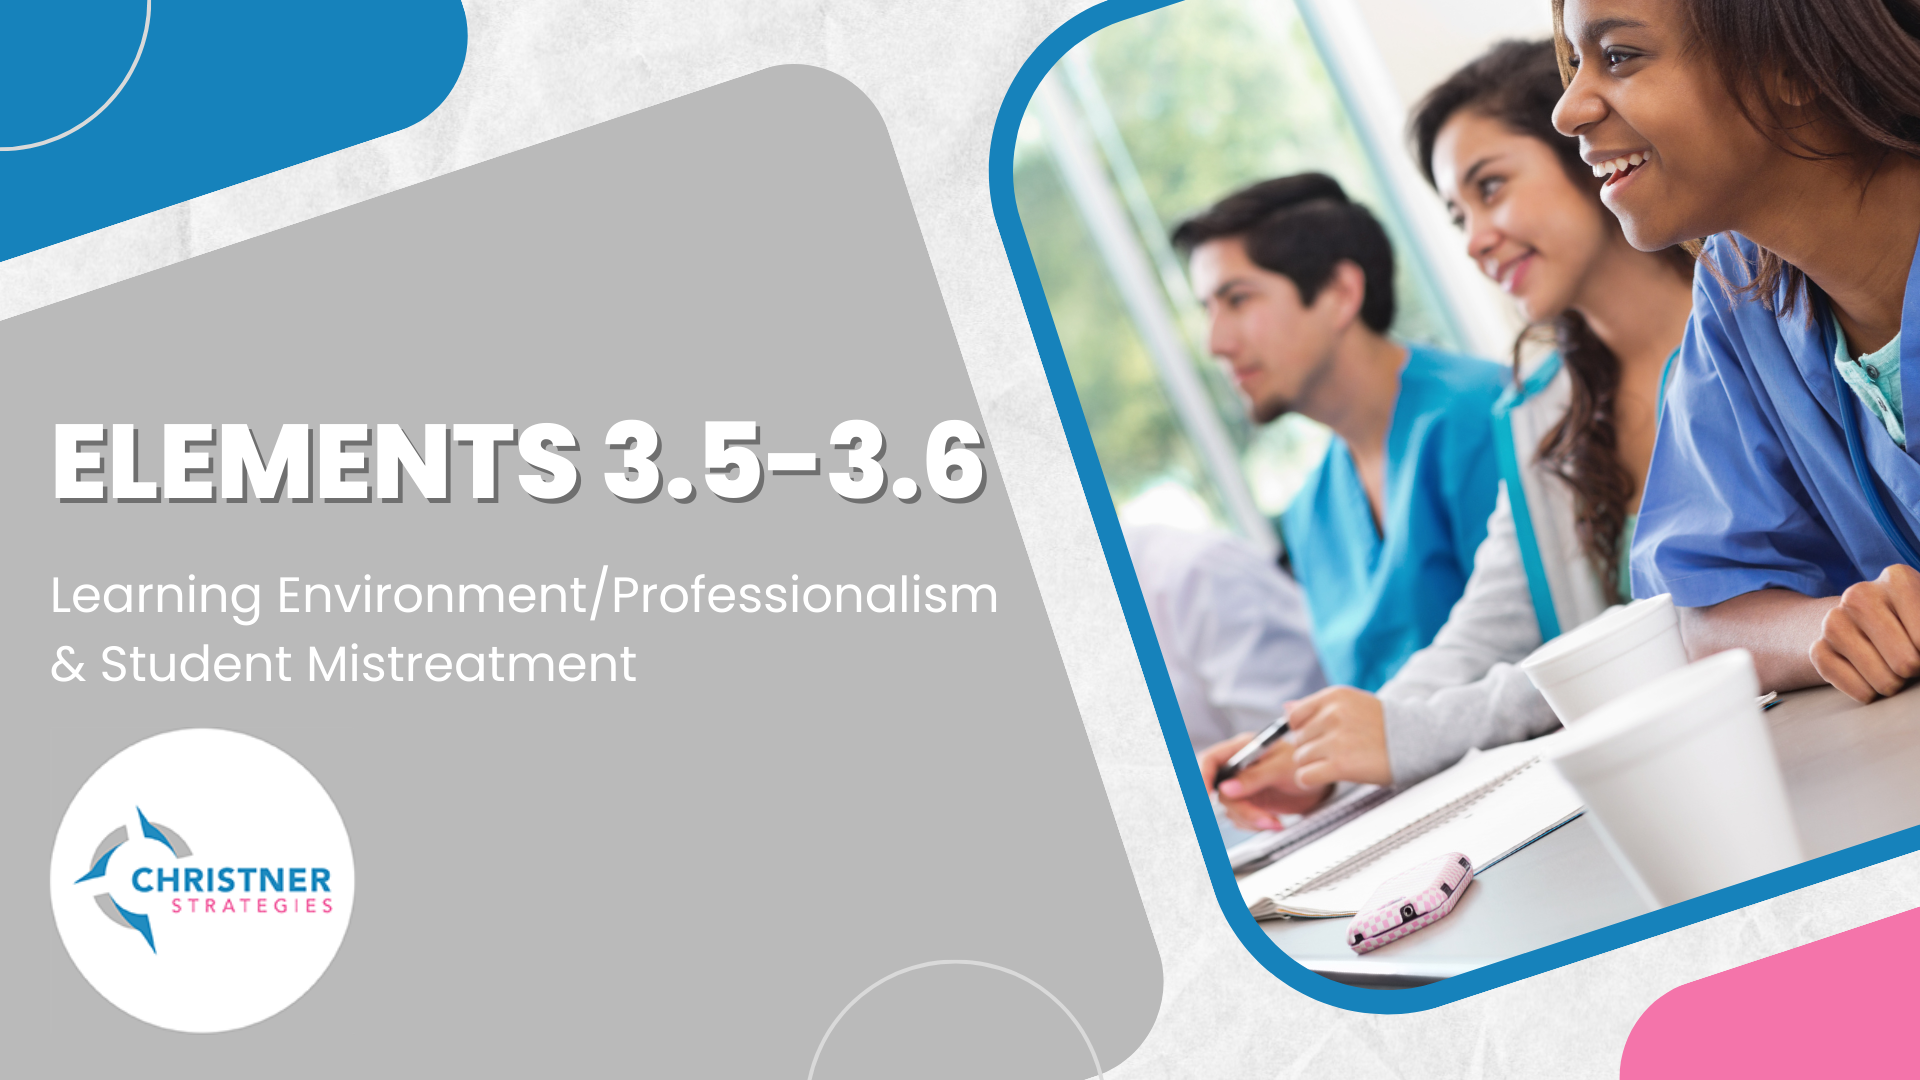 LCME Element 3.5 - Learning Environment/Professionalism and 3.6 - Student Mistreatment